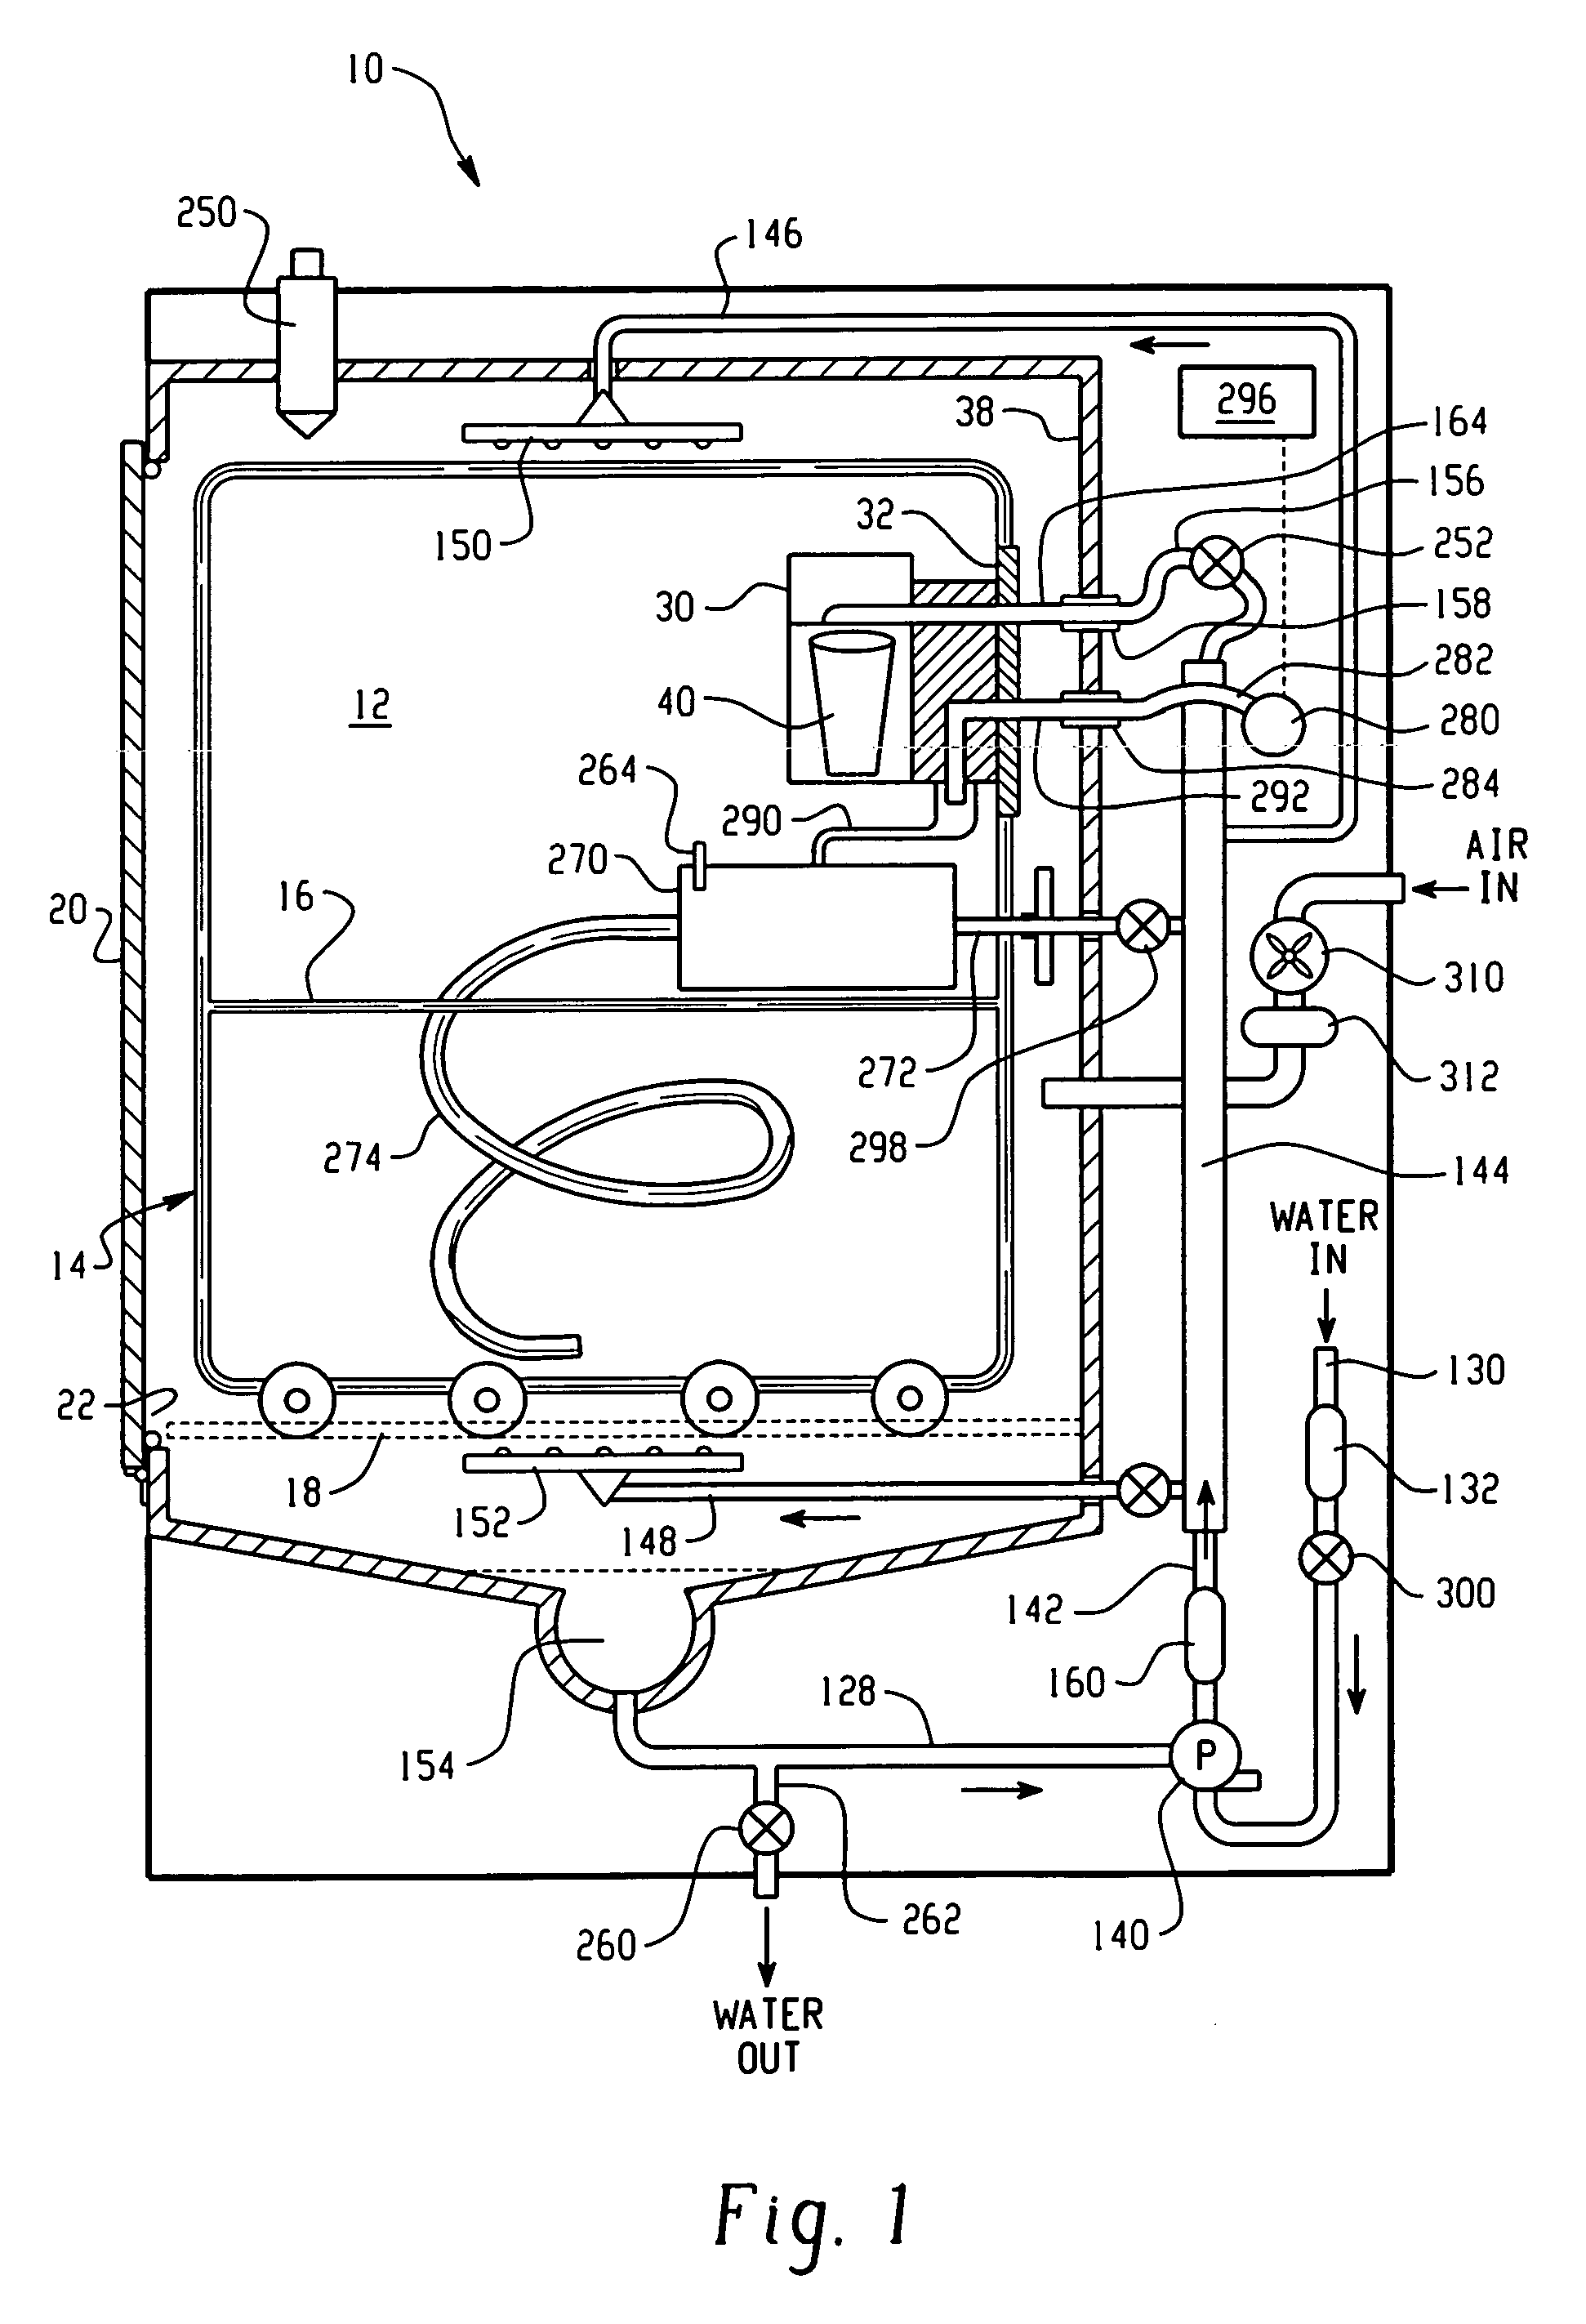 Cartridge holder for automated reprocessor